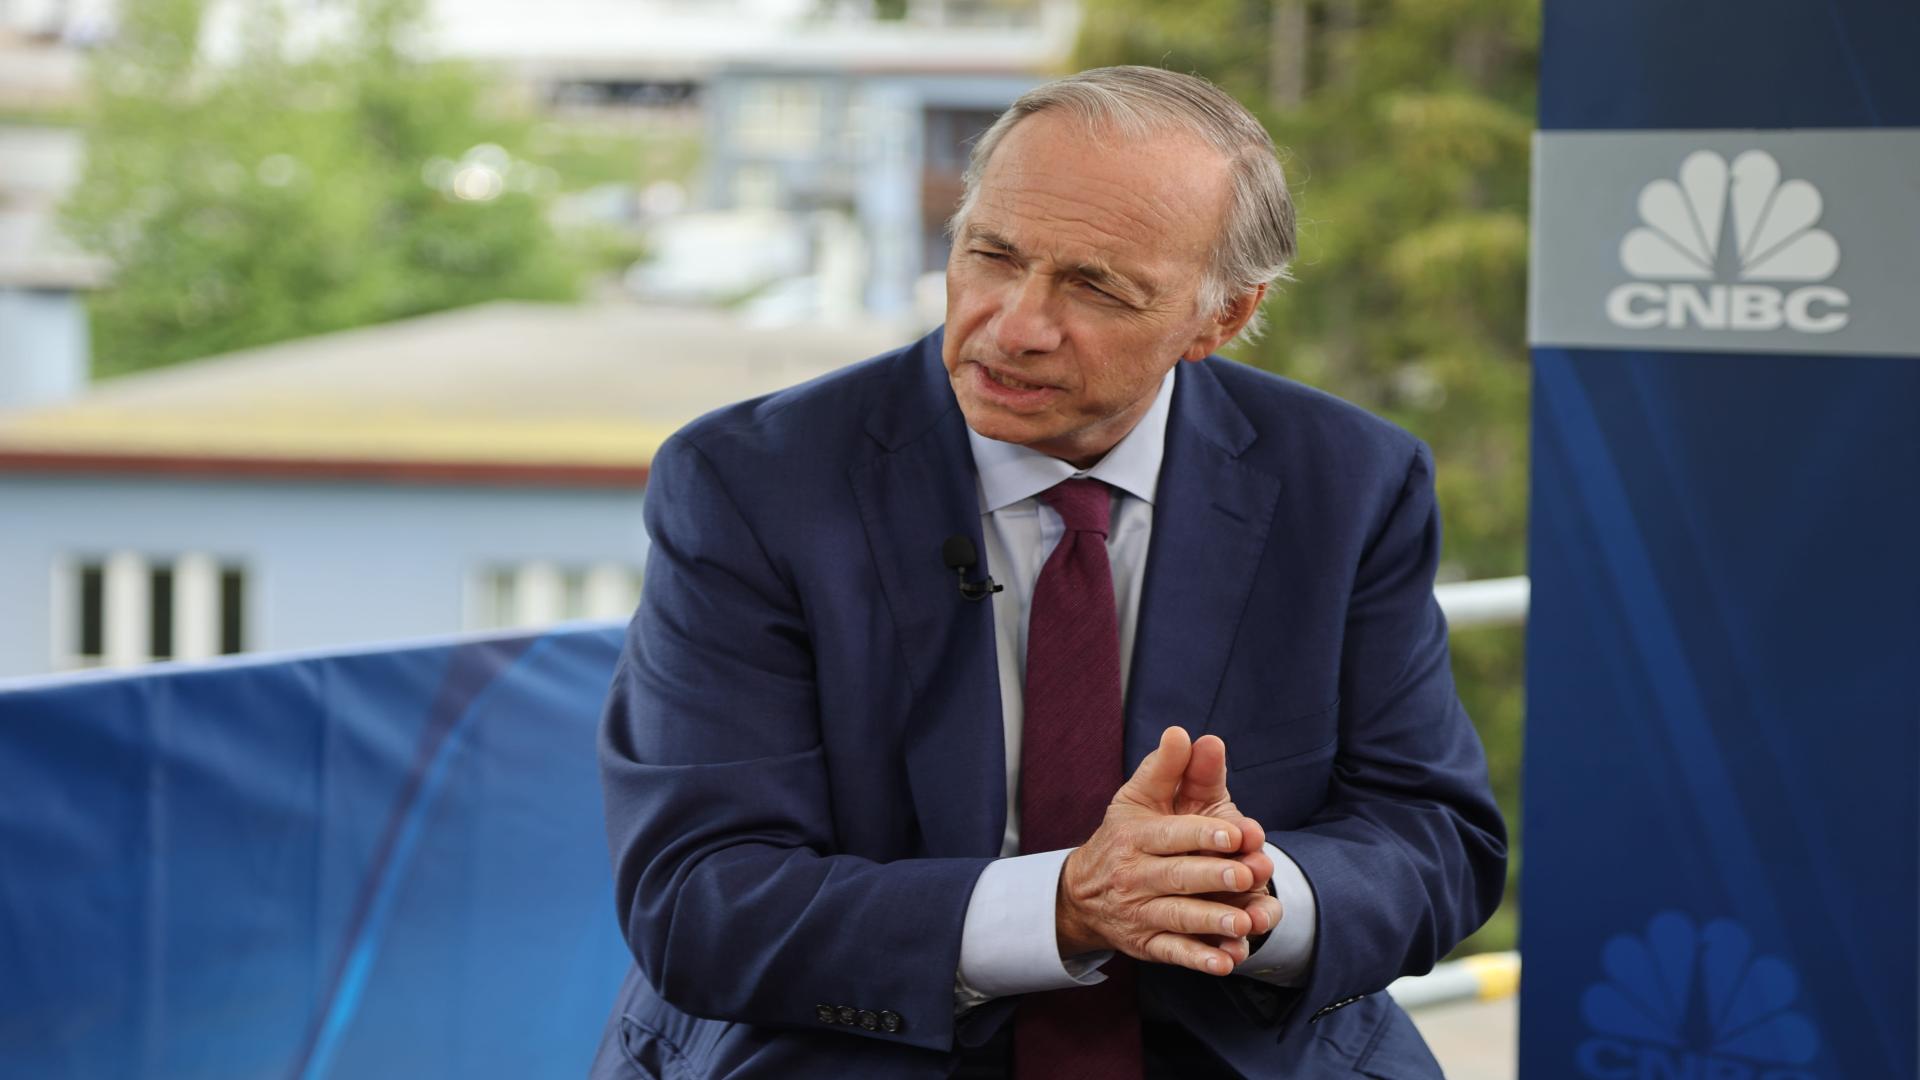 'At the takeoff point': Ray Dalio says the Gulf states look 'very, very attractive'